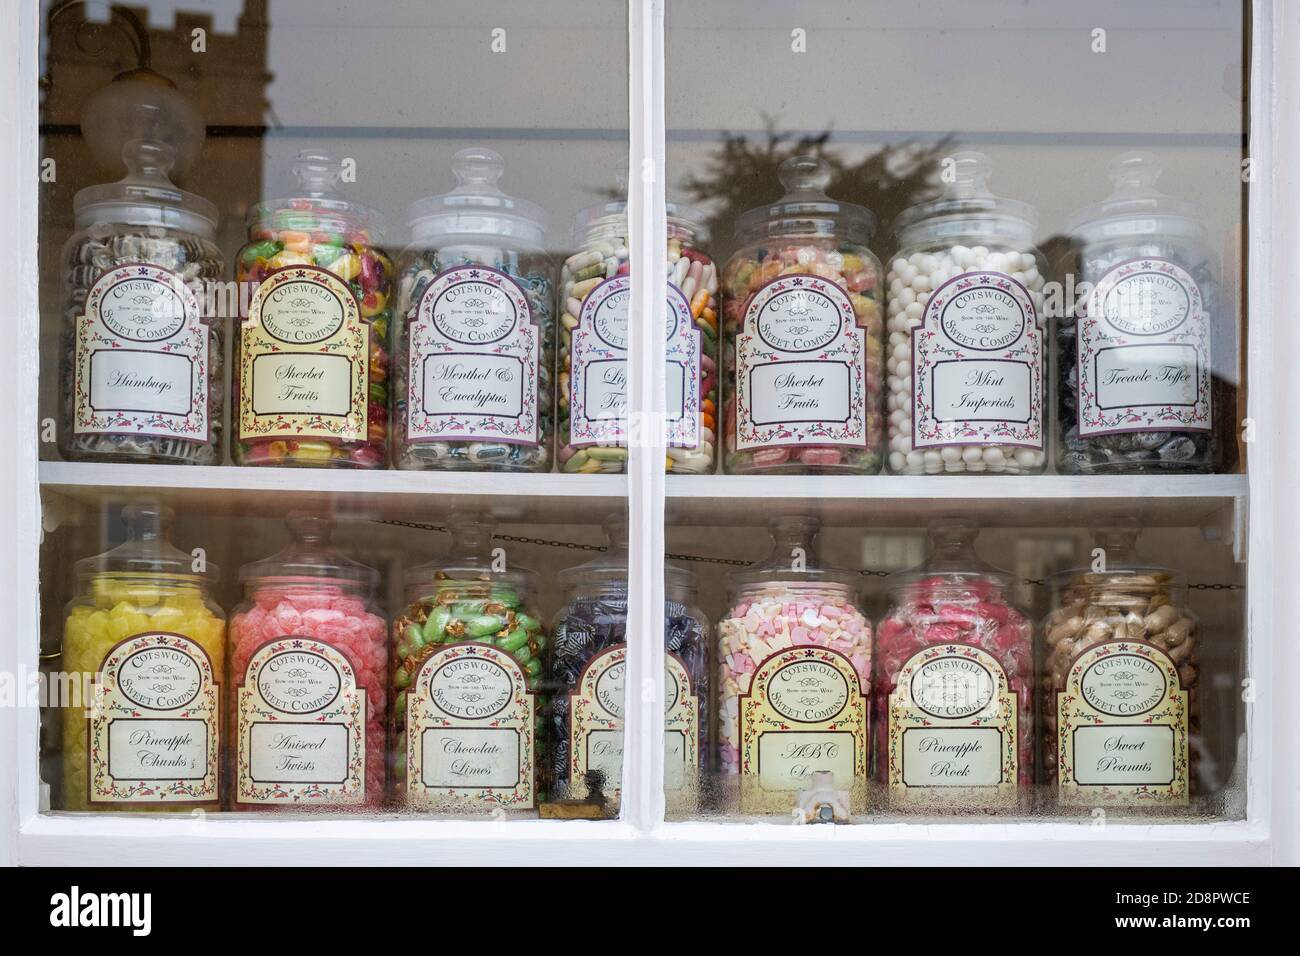 Jars of sweets in the window of the cotswold sweet company. Stow on the Wold, Cotswolds, Gloucestershire, England Stock Photo